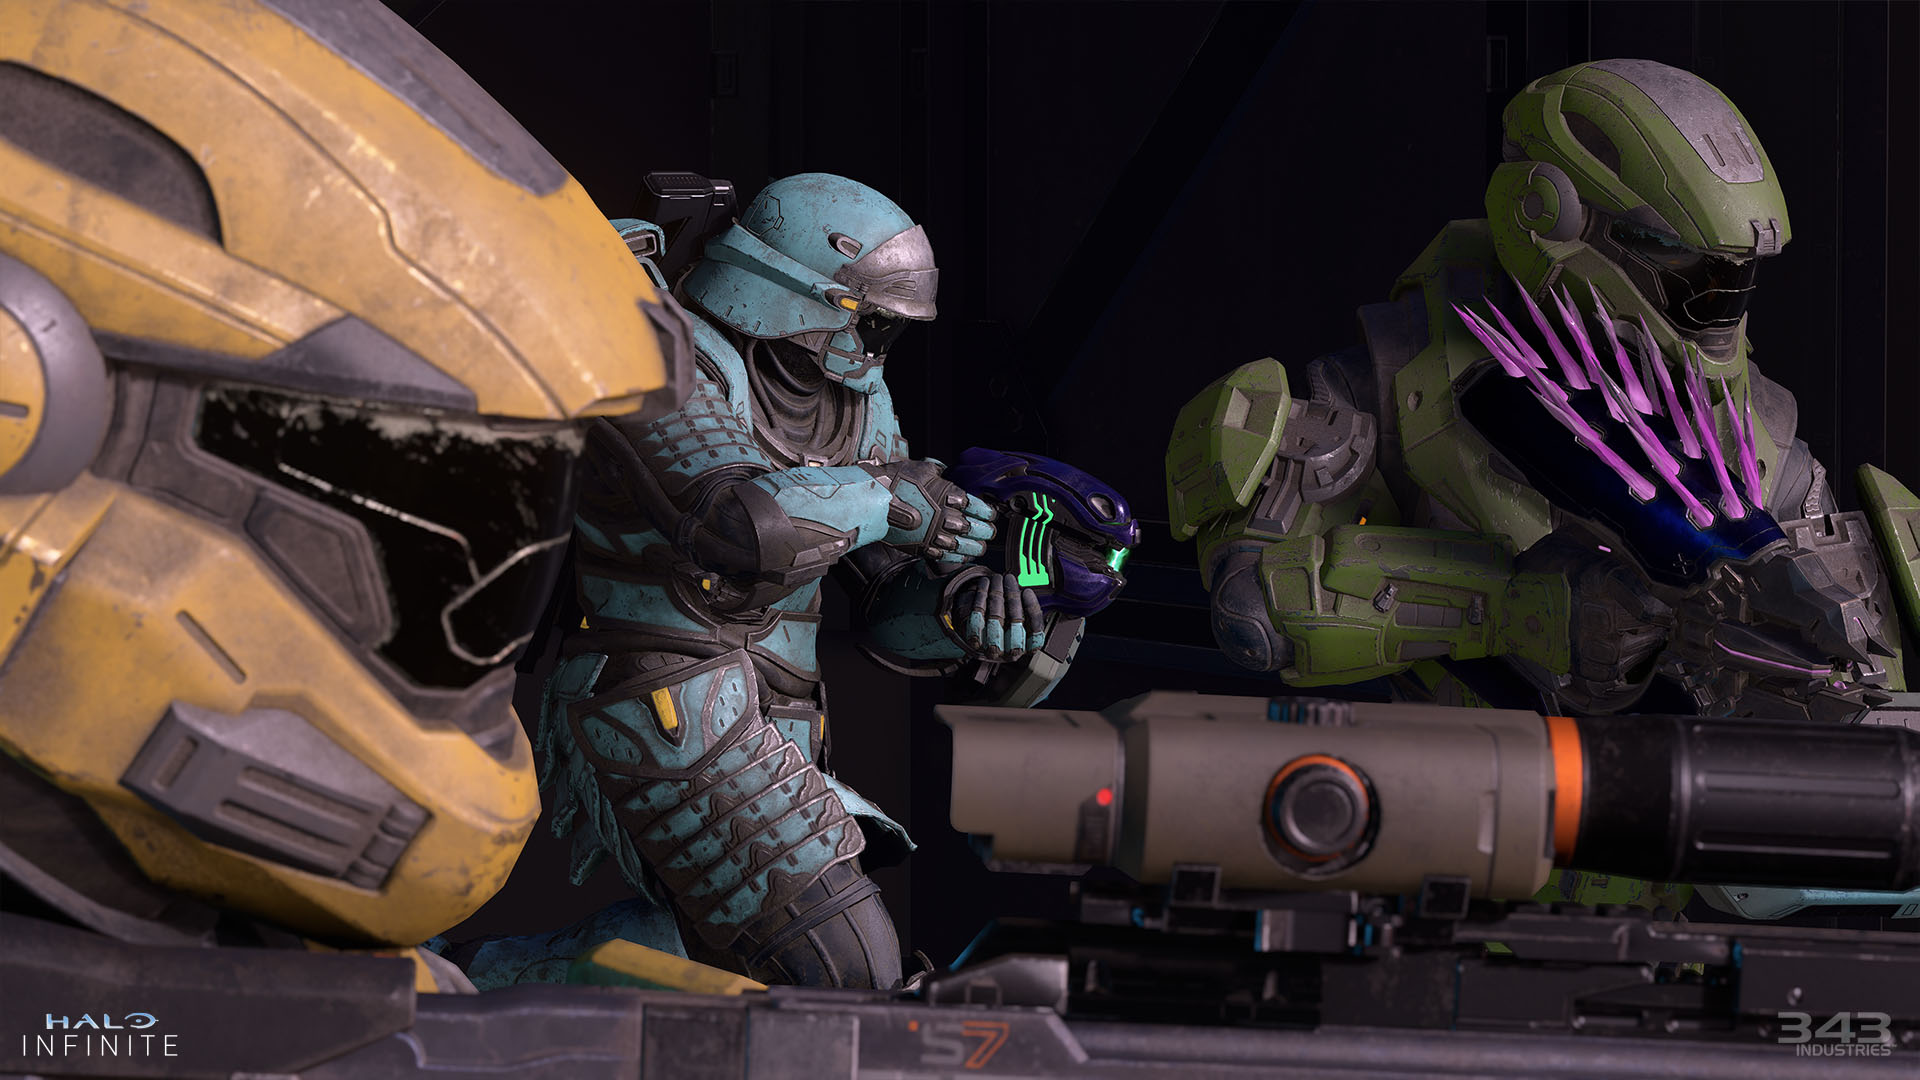 Halo Infinite action screenshot of multiple Spartan Armor Types with Cadet skins